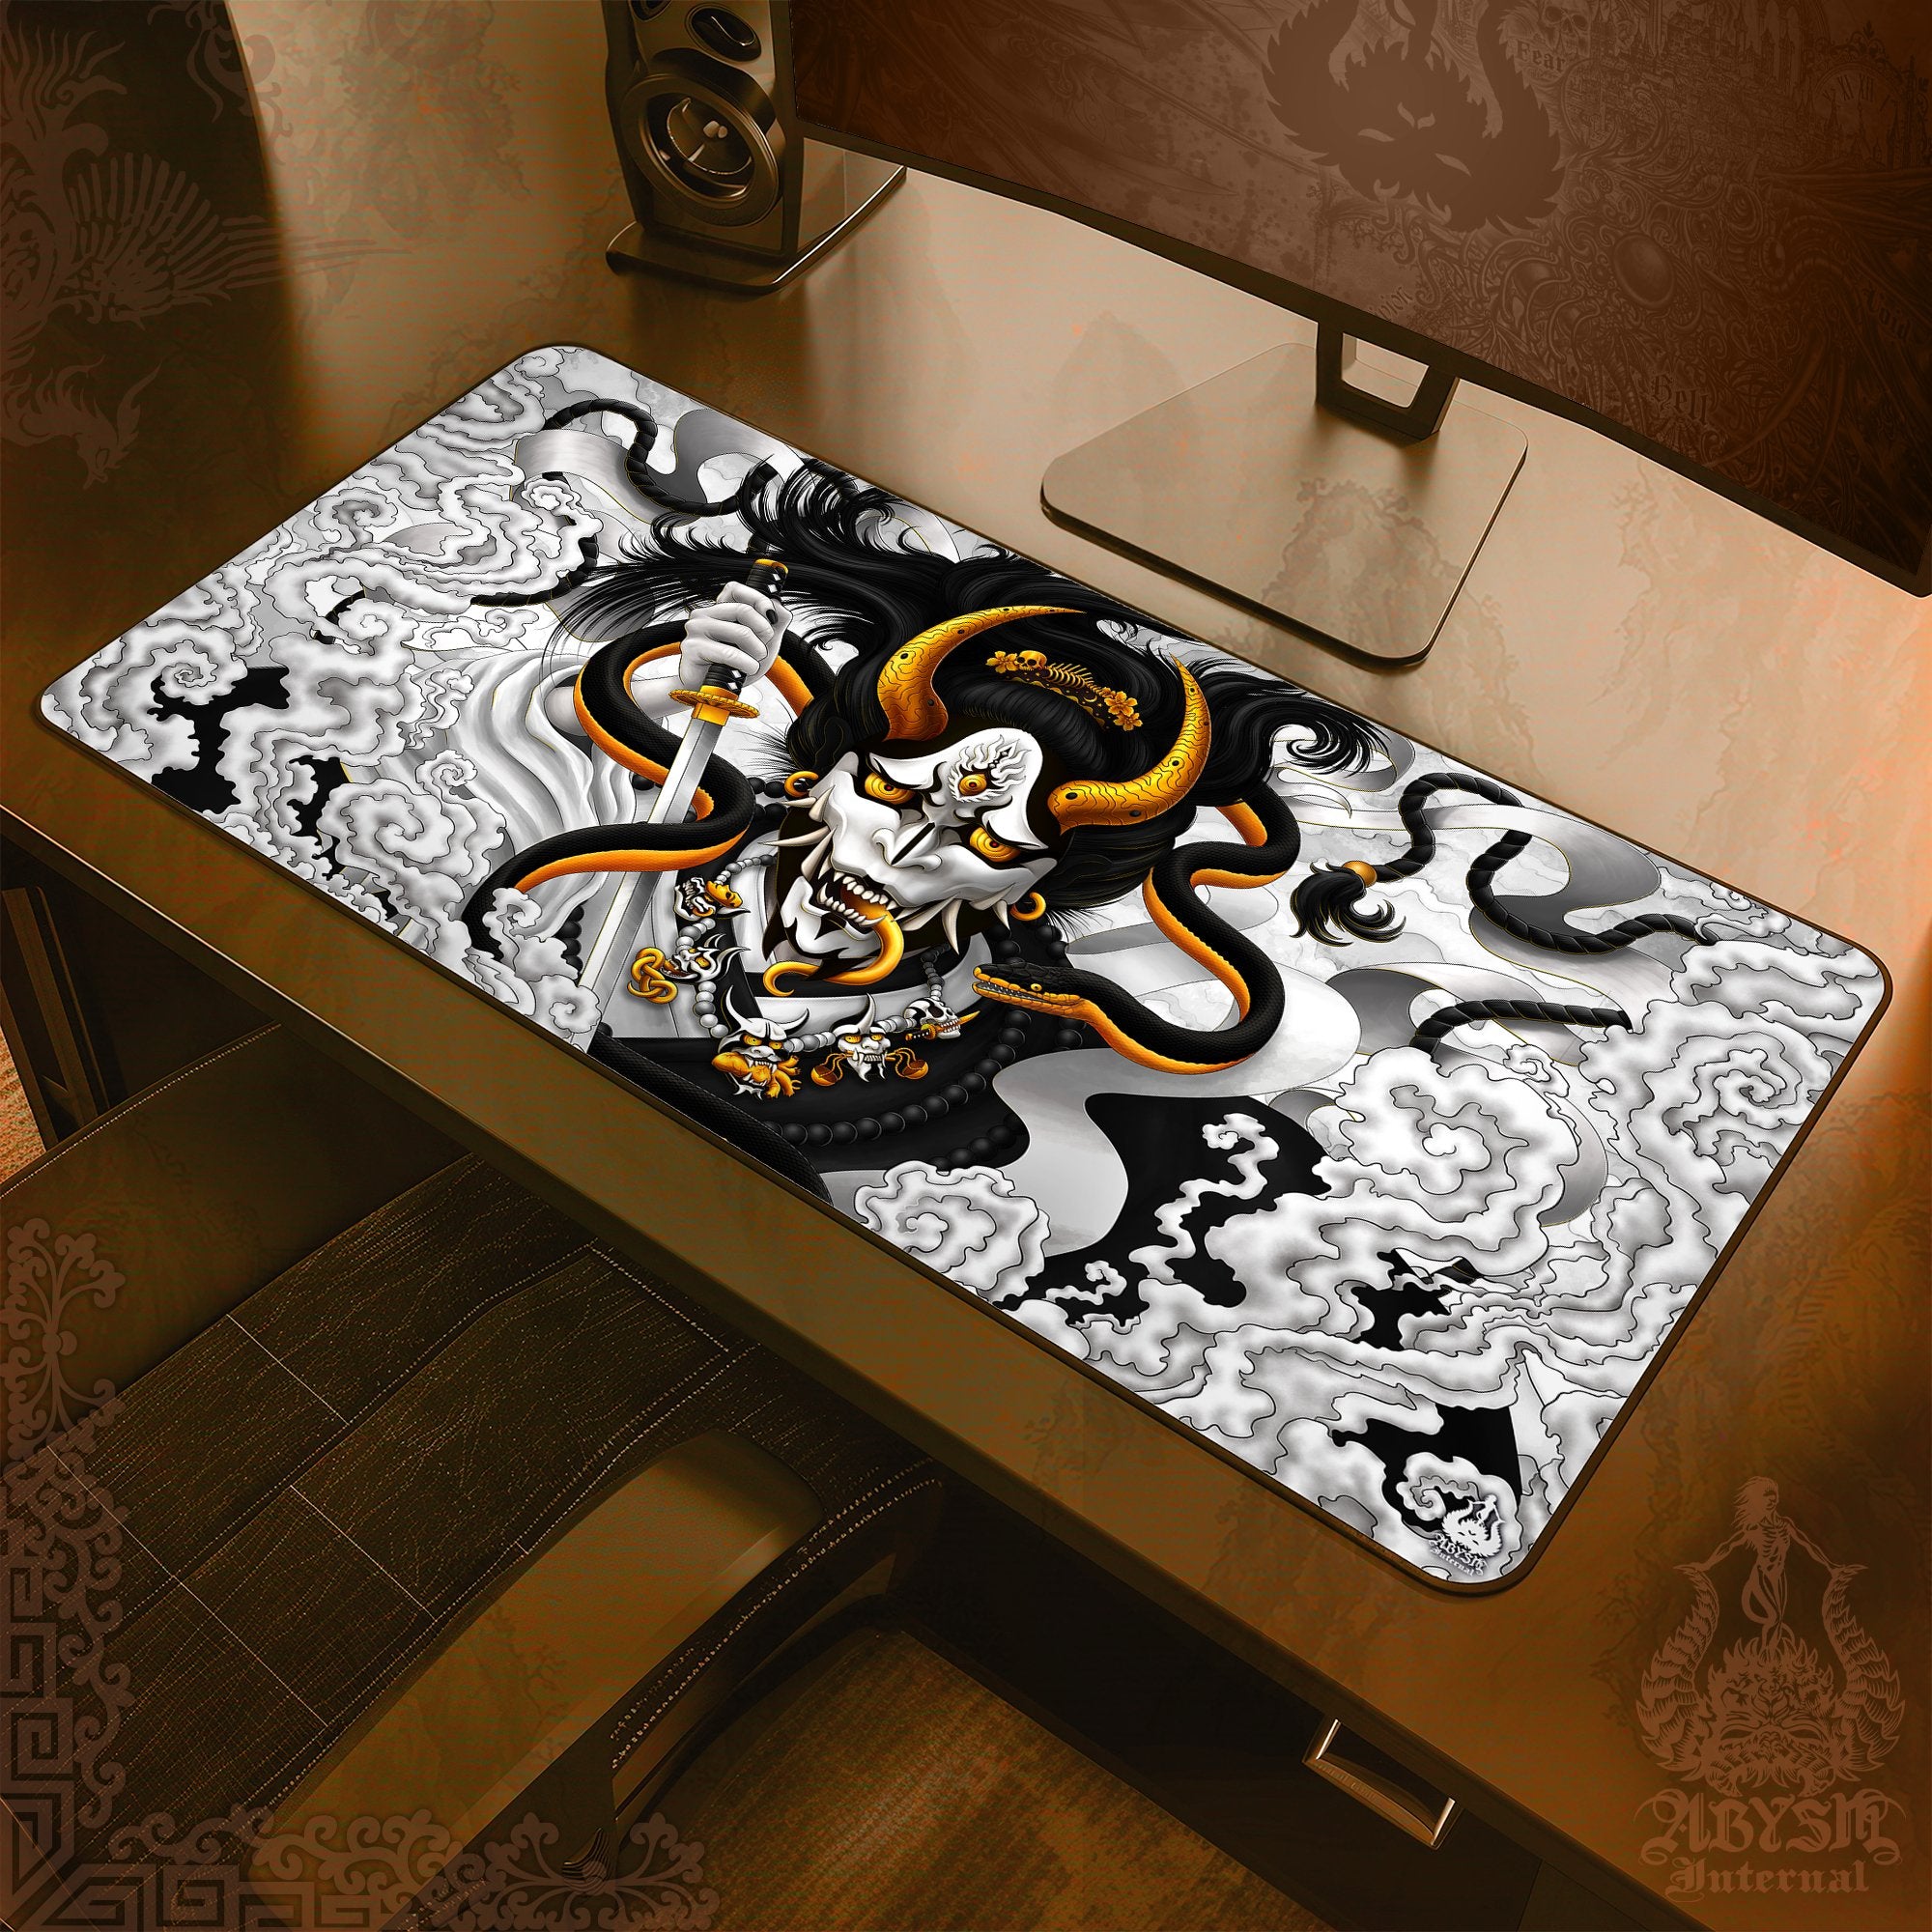 Hannya Gaming Mouse Pad, Youkai Desk Mat, Japanese Demon Table Protector Cover, Black and White Workpad, Fantasy Anime and Manga Art Print - Snake - Abysm Internal